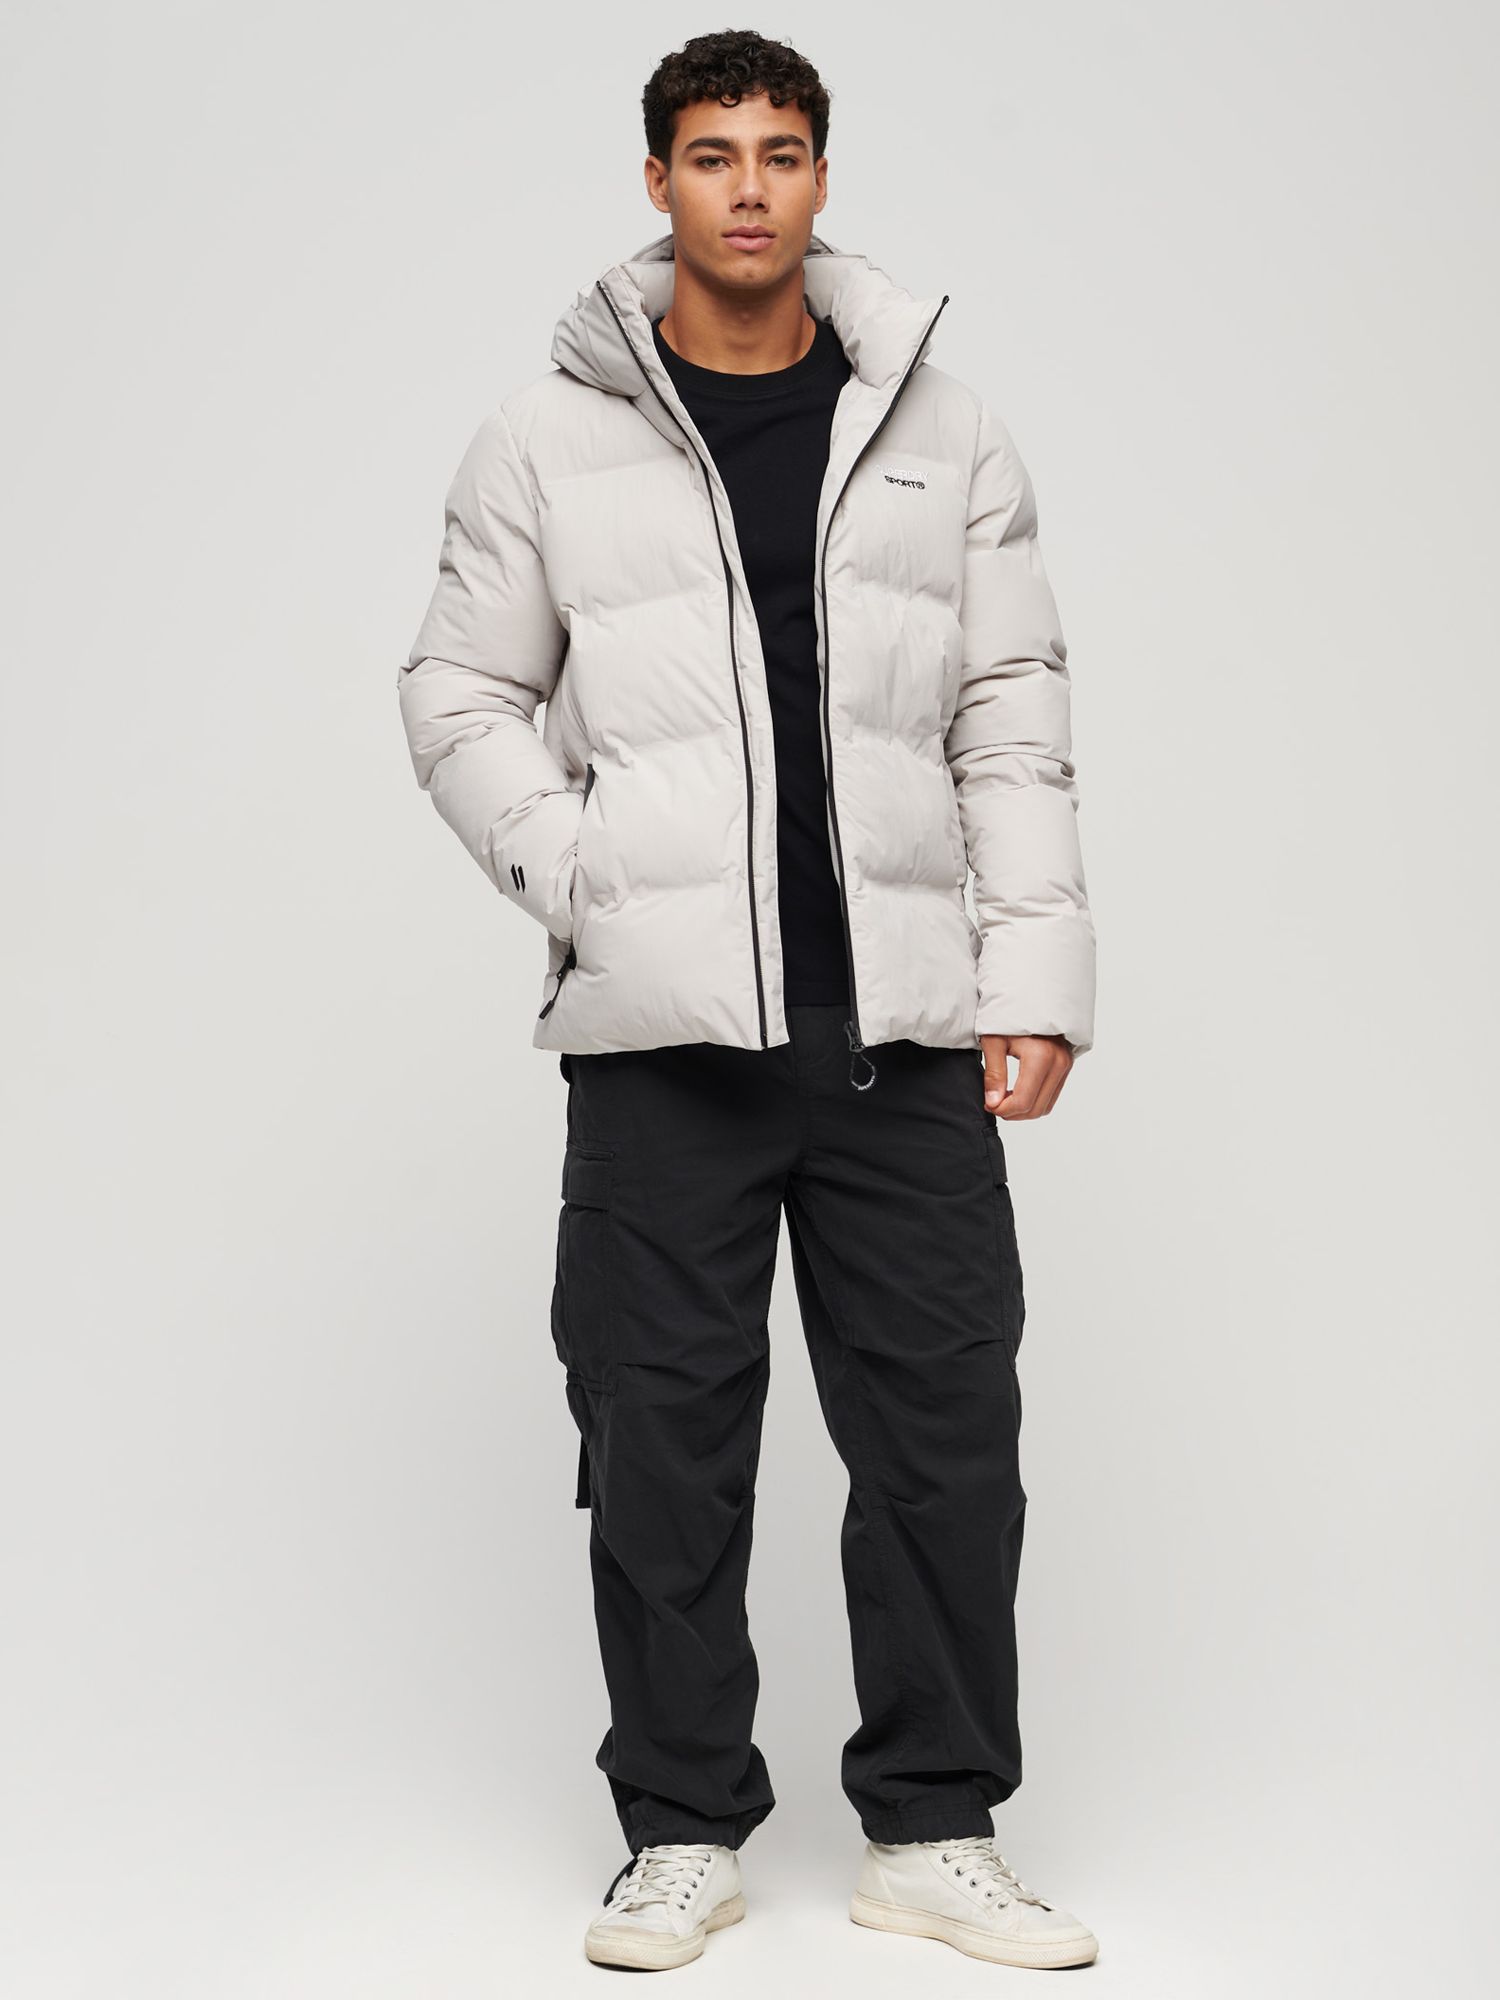 at Lewis & Hooded Superdry Boxy John Puffer Jacket, Partners Grey Moonlight